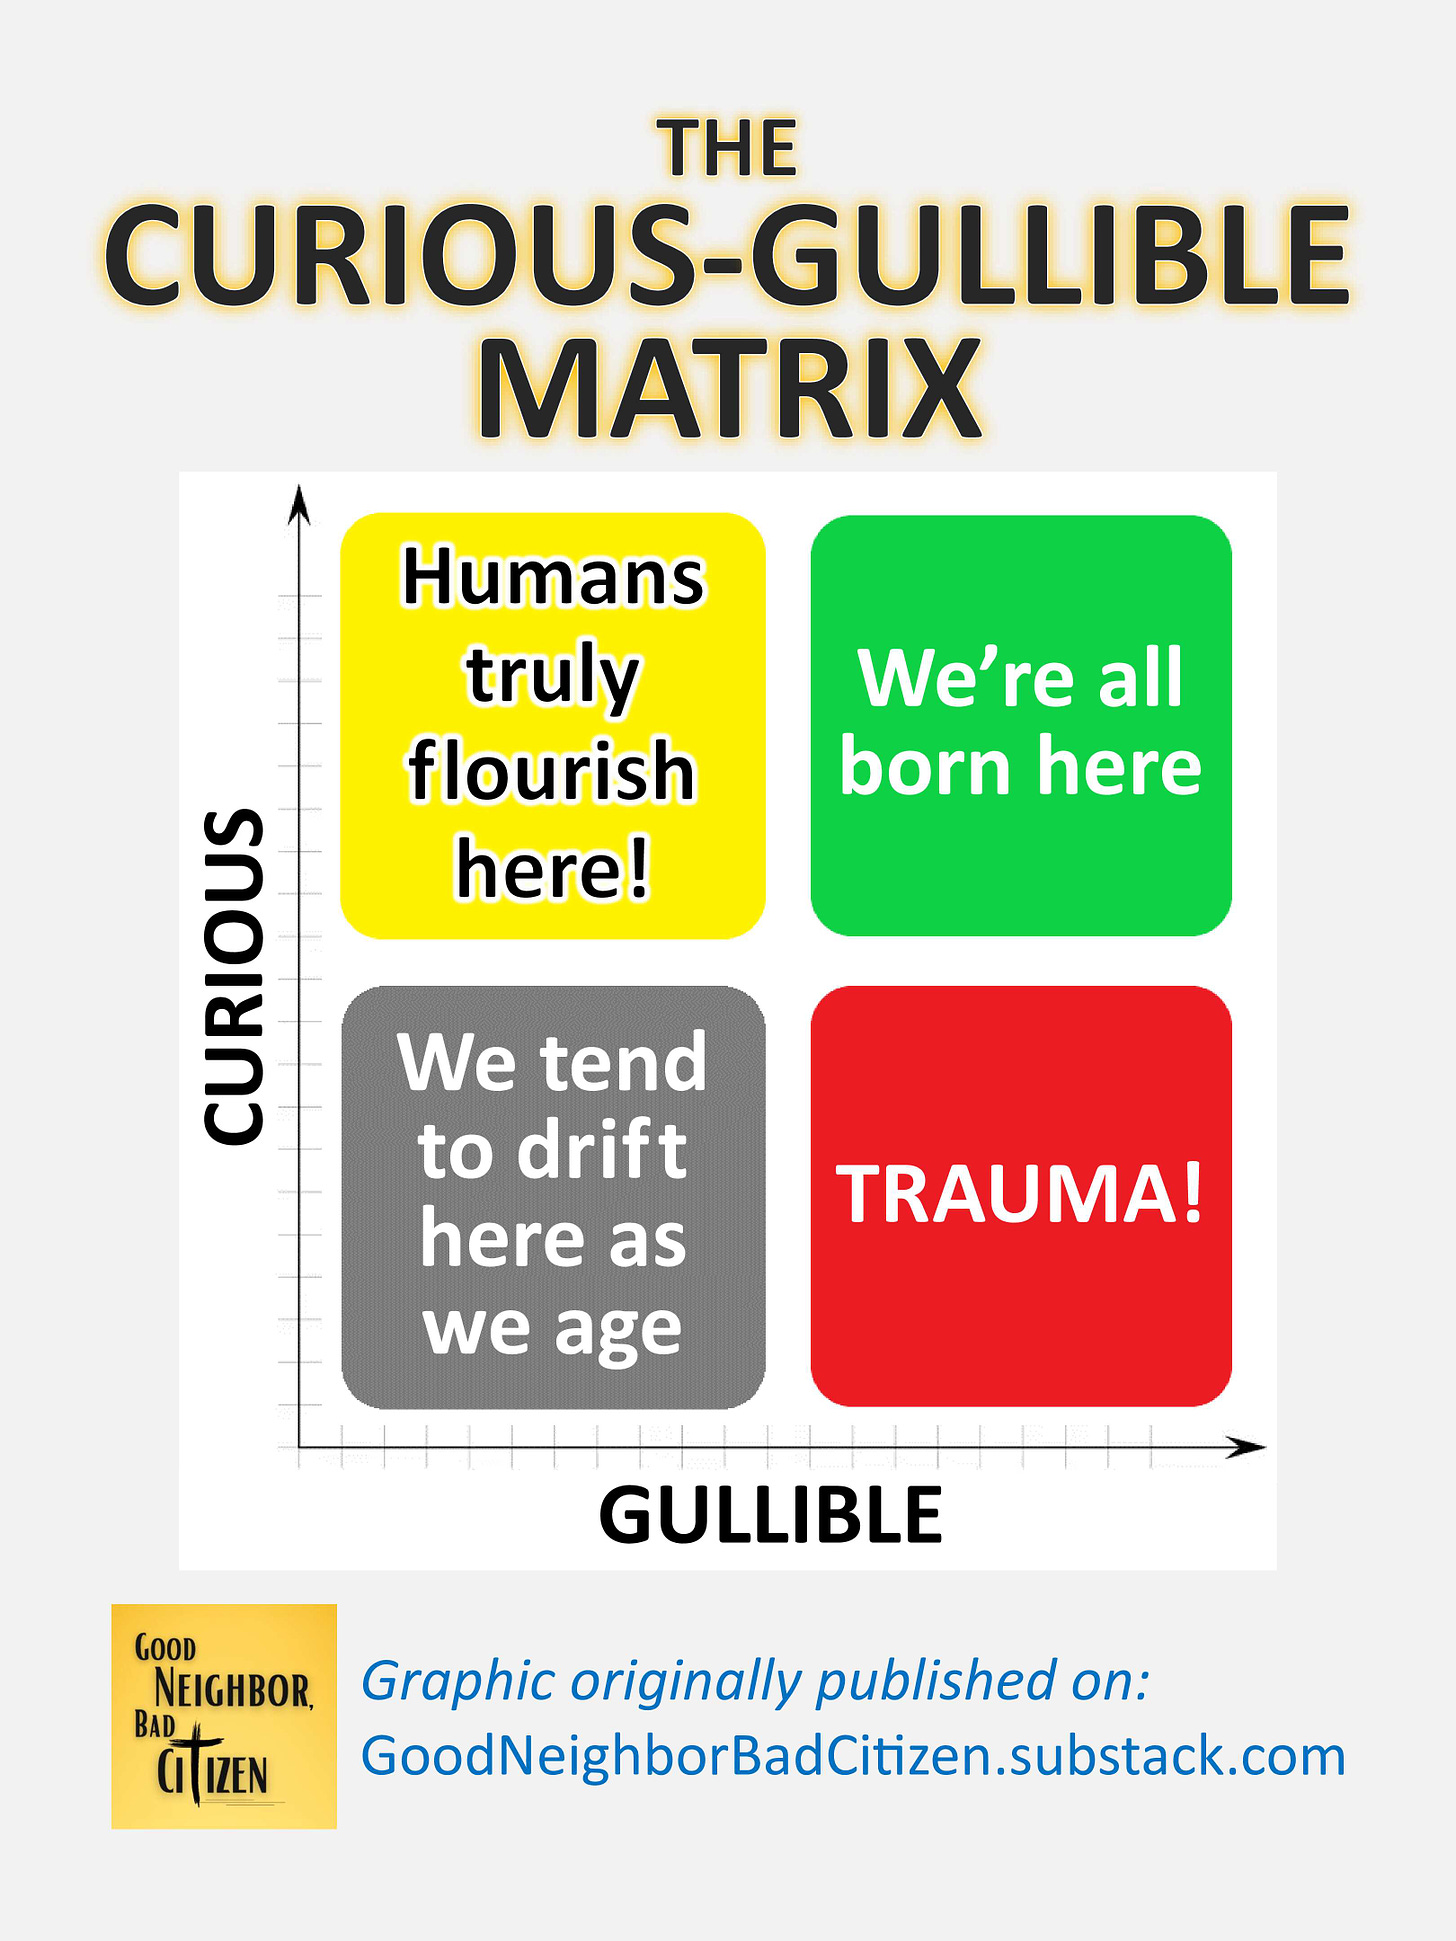 The Curious-Gullible Matrix has Curious on the vertical axis and Gullible on the horizontal axis.  The bottom left corner is the lowest value, with the values increasing as you move up and to the right. The Top Right quadrant is high curious and high gullible.  This quadrant is labeled, "We're all born here." The Bottom Left quadrant is low curious and low gullible.  This quadrant reads, "We tend to drift here as we age." The Bottom Right quadrant is low curious, but high gullible, and has a one-word warning:  "Trauma!" The Top Left quadrant of high curious and low gullible says, "Humans truly flourish here!" Graphic originally published on: Good Neighbor Bad Citizen dot Substack dot com.